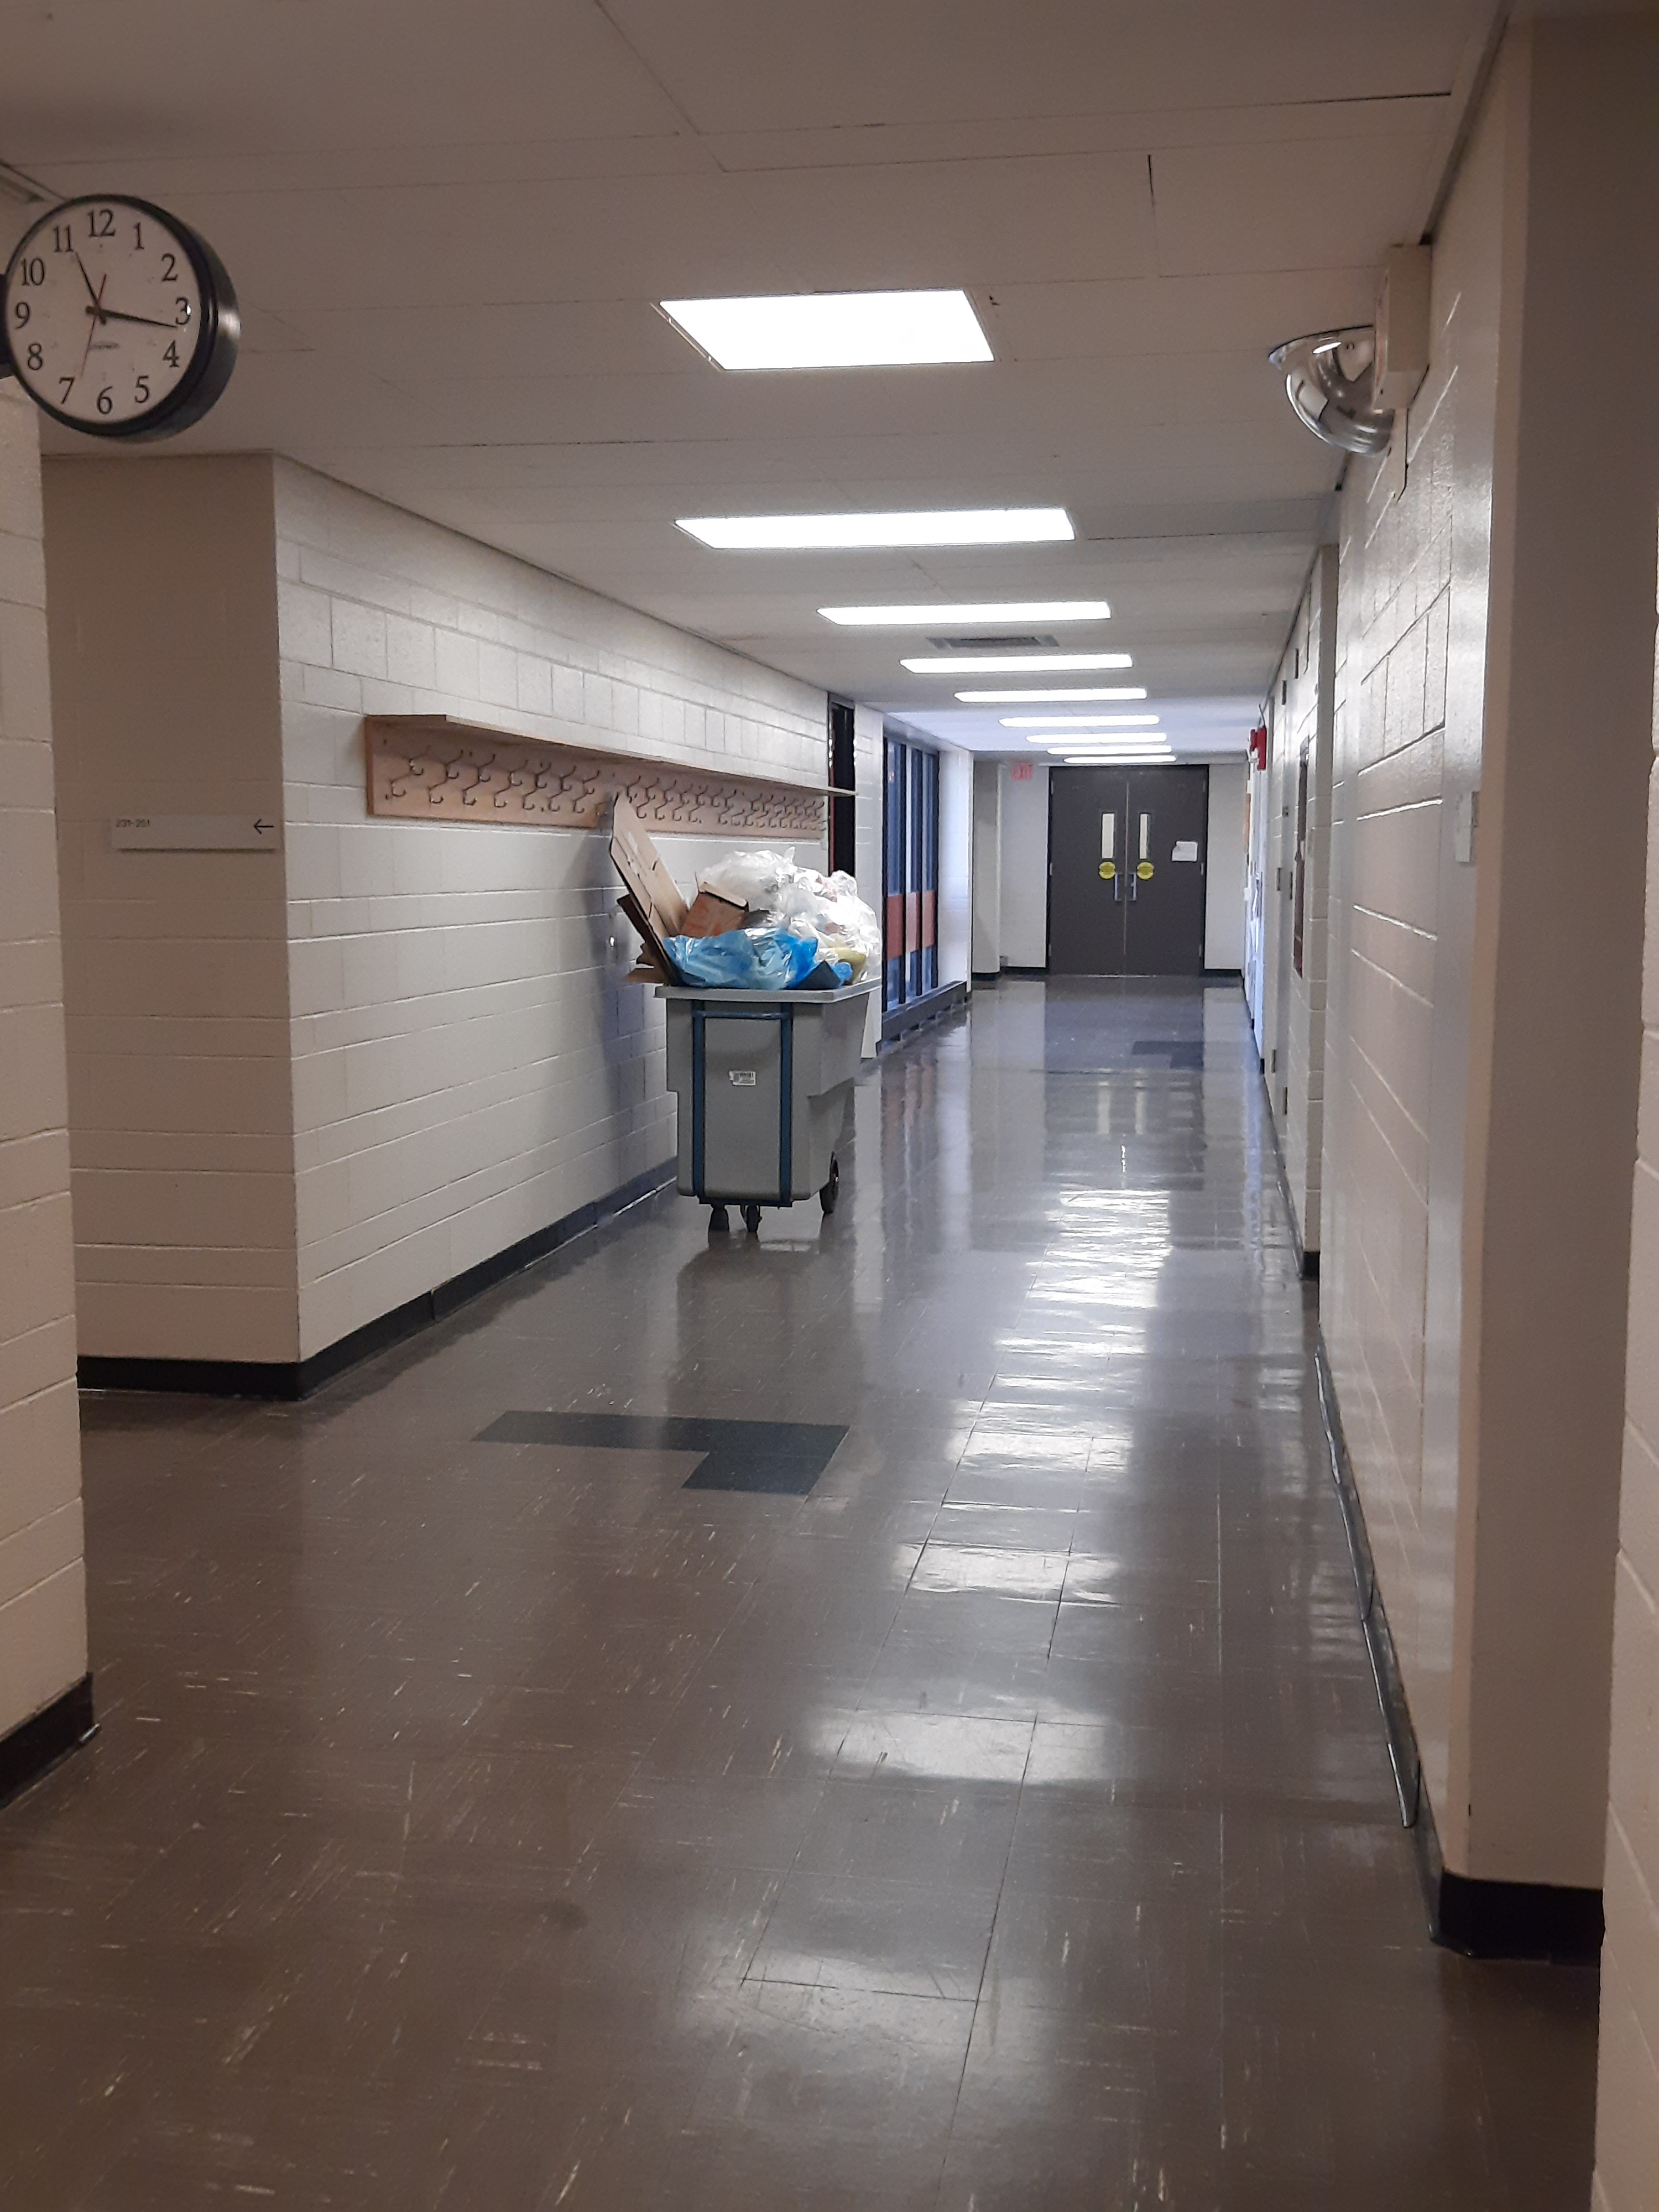 A hallway on the second floor of the Animal Science building.